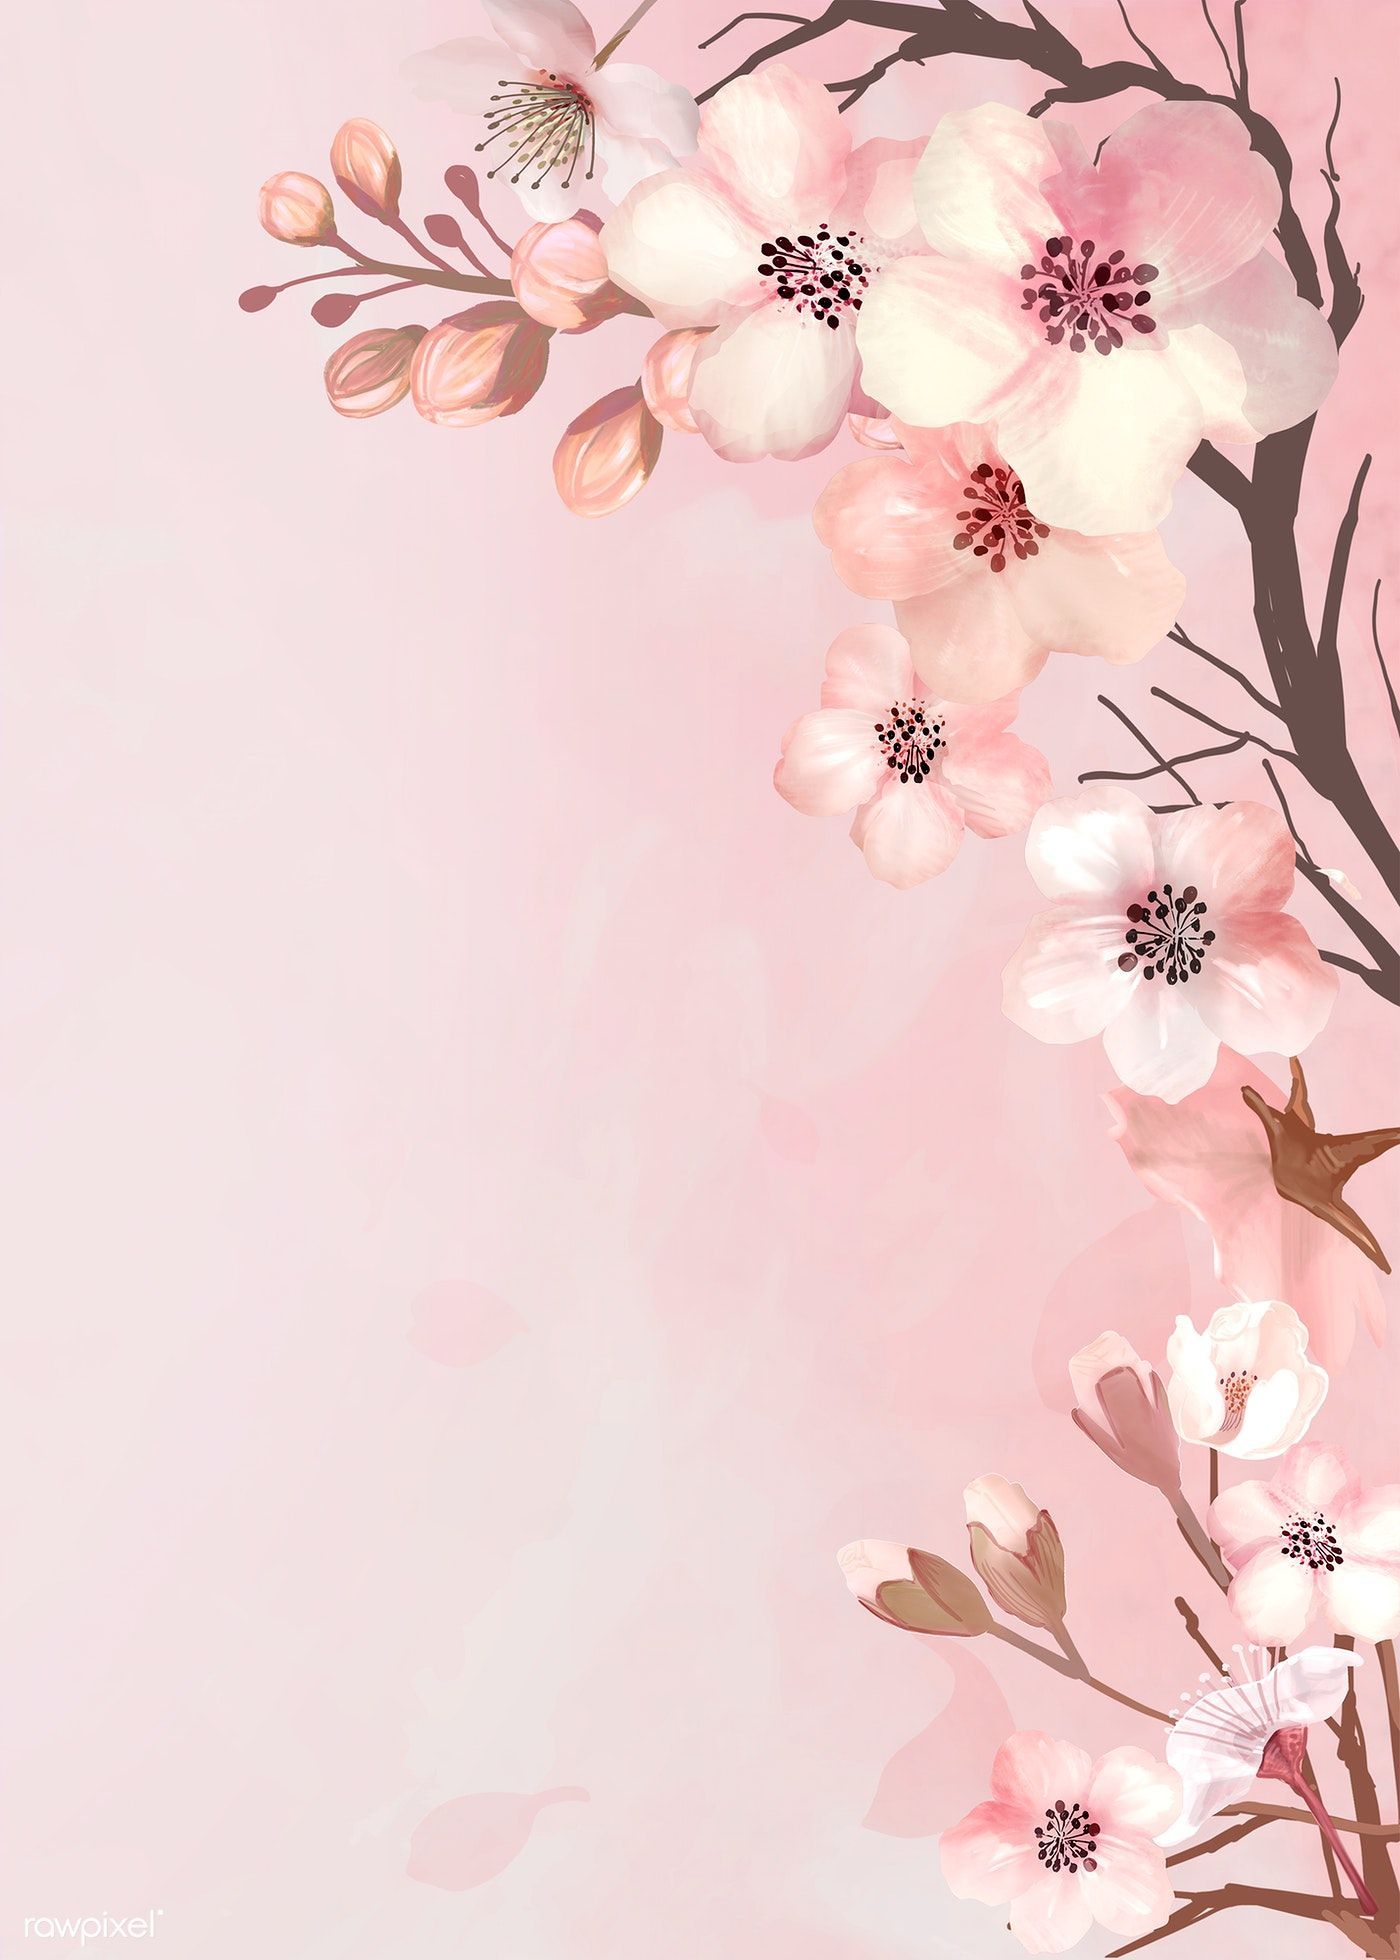 A pink and white flower background - Cherry blossom